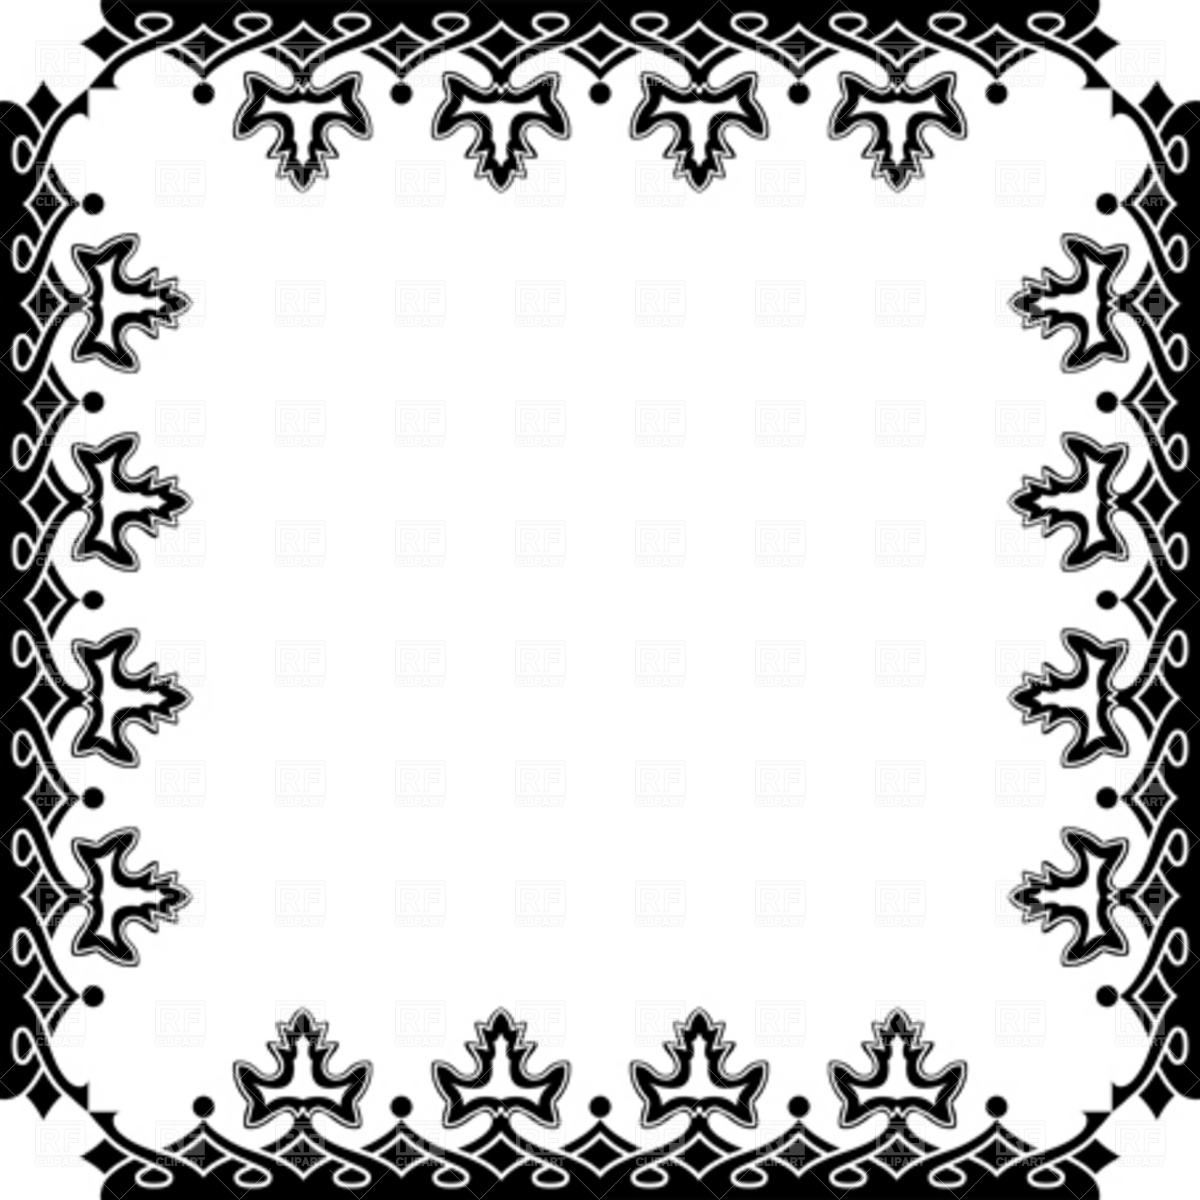 Victorian frame clipart.